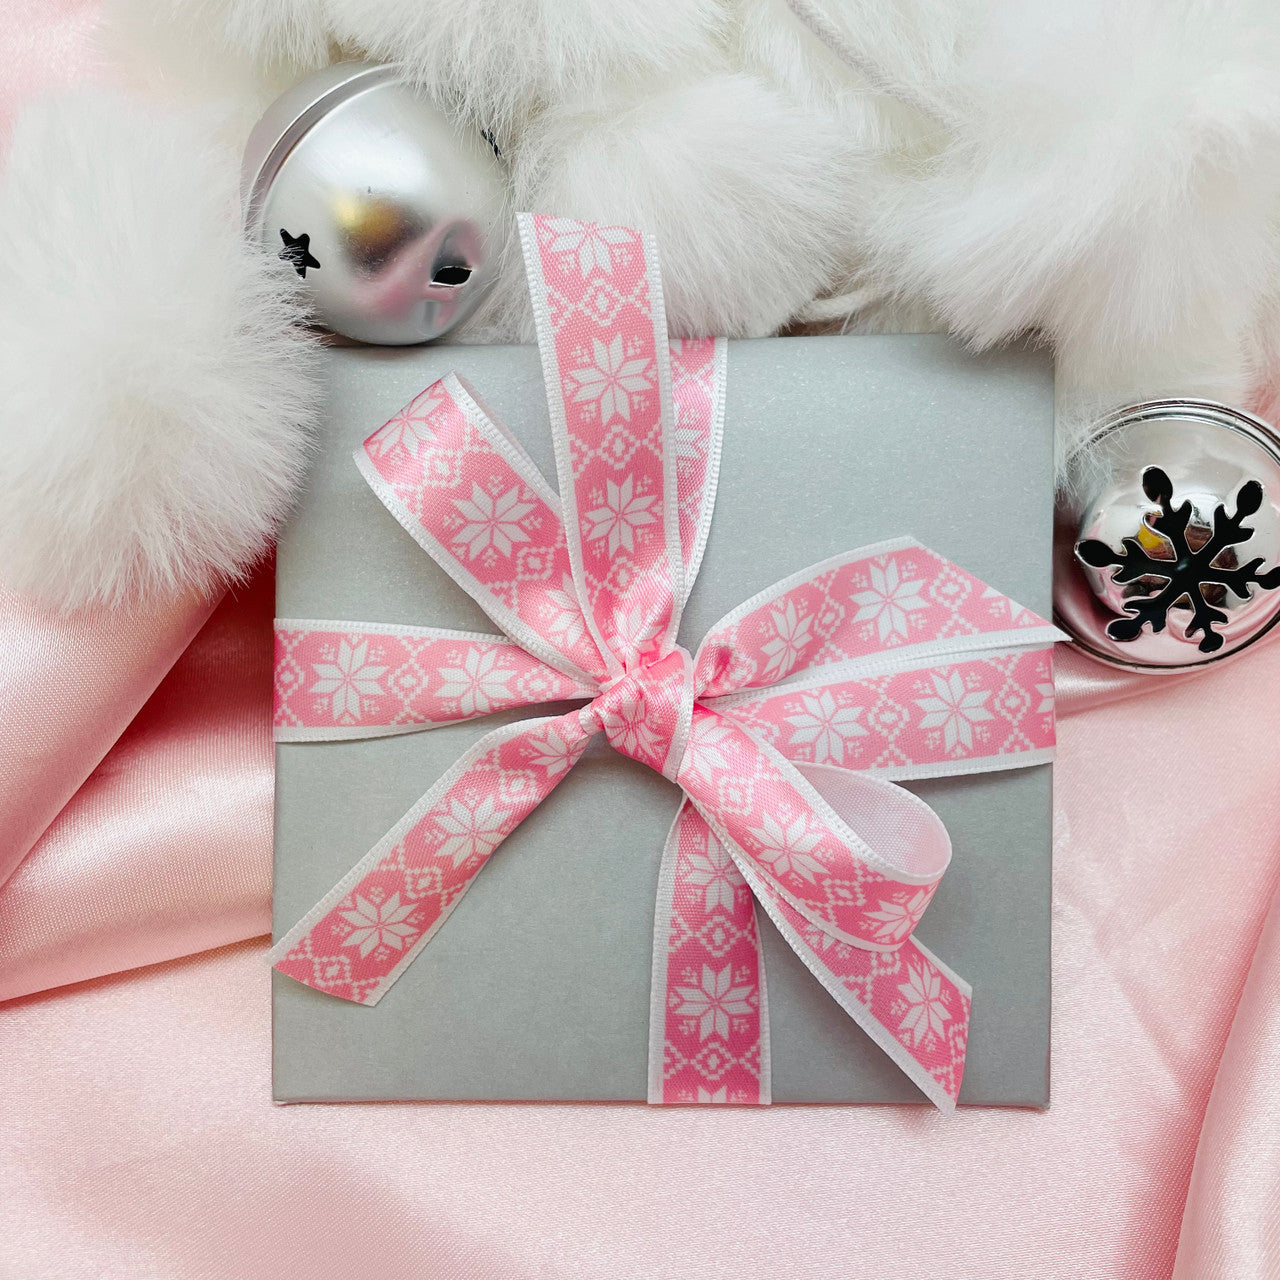 Nordic snowflakes in white on a pink background printed on 5/8" white single face satin ribbon tied on a sweet package makes for such a pretty pastel Holiday gift!